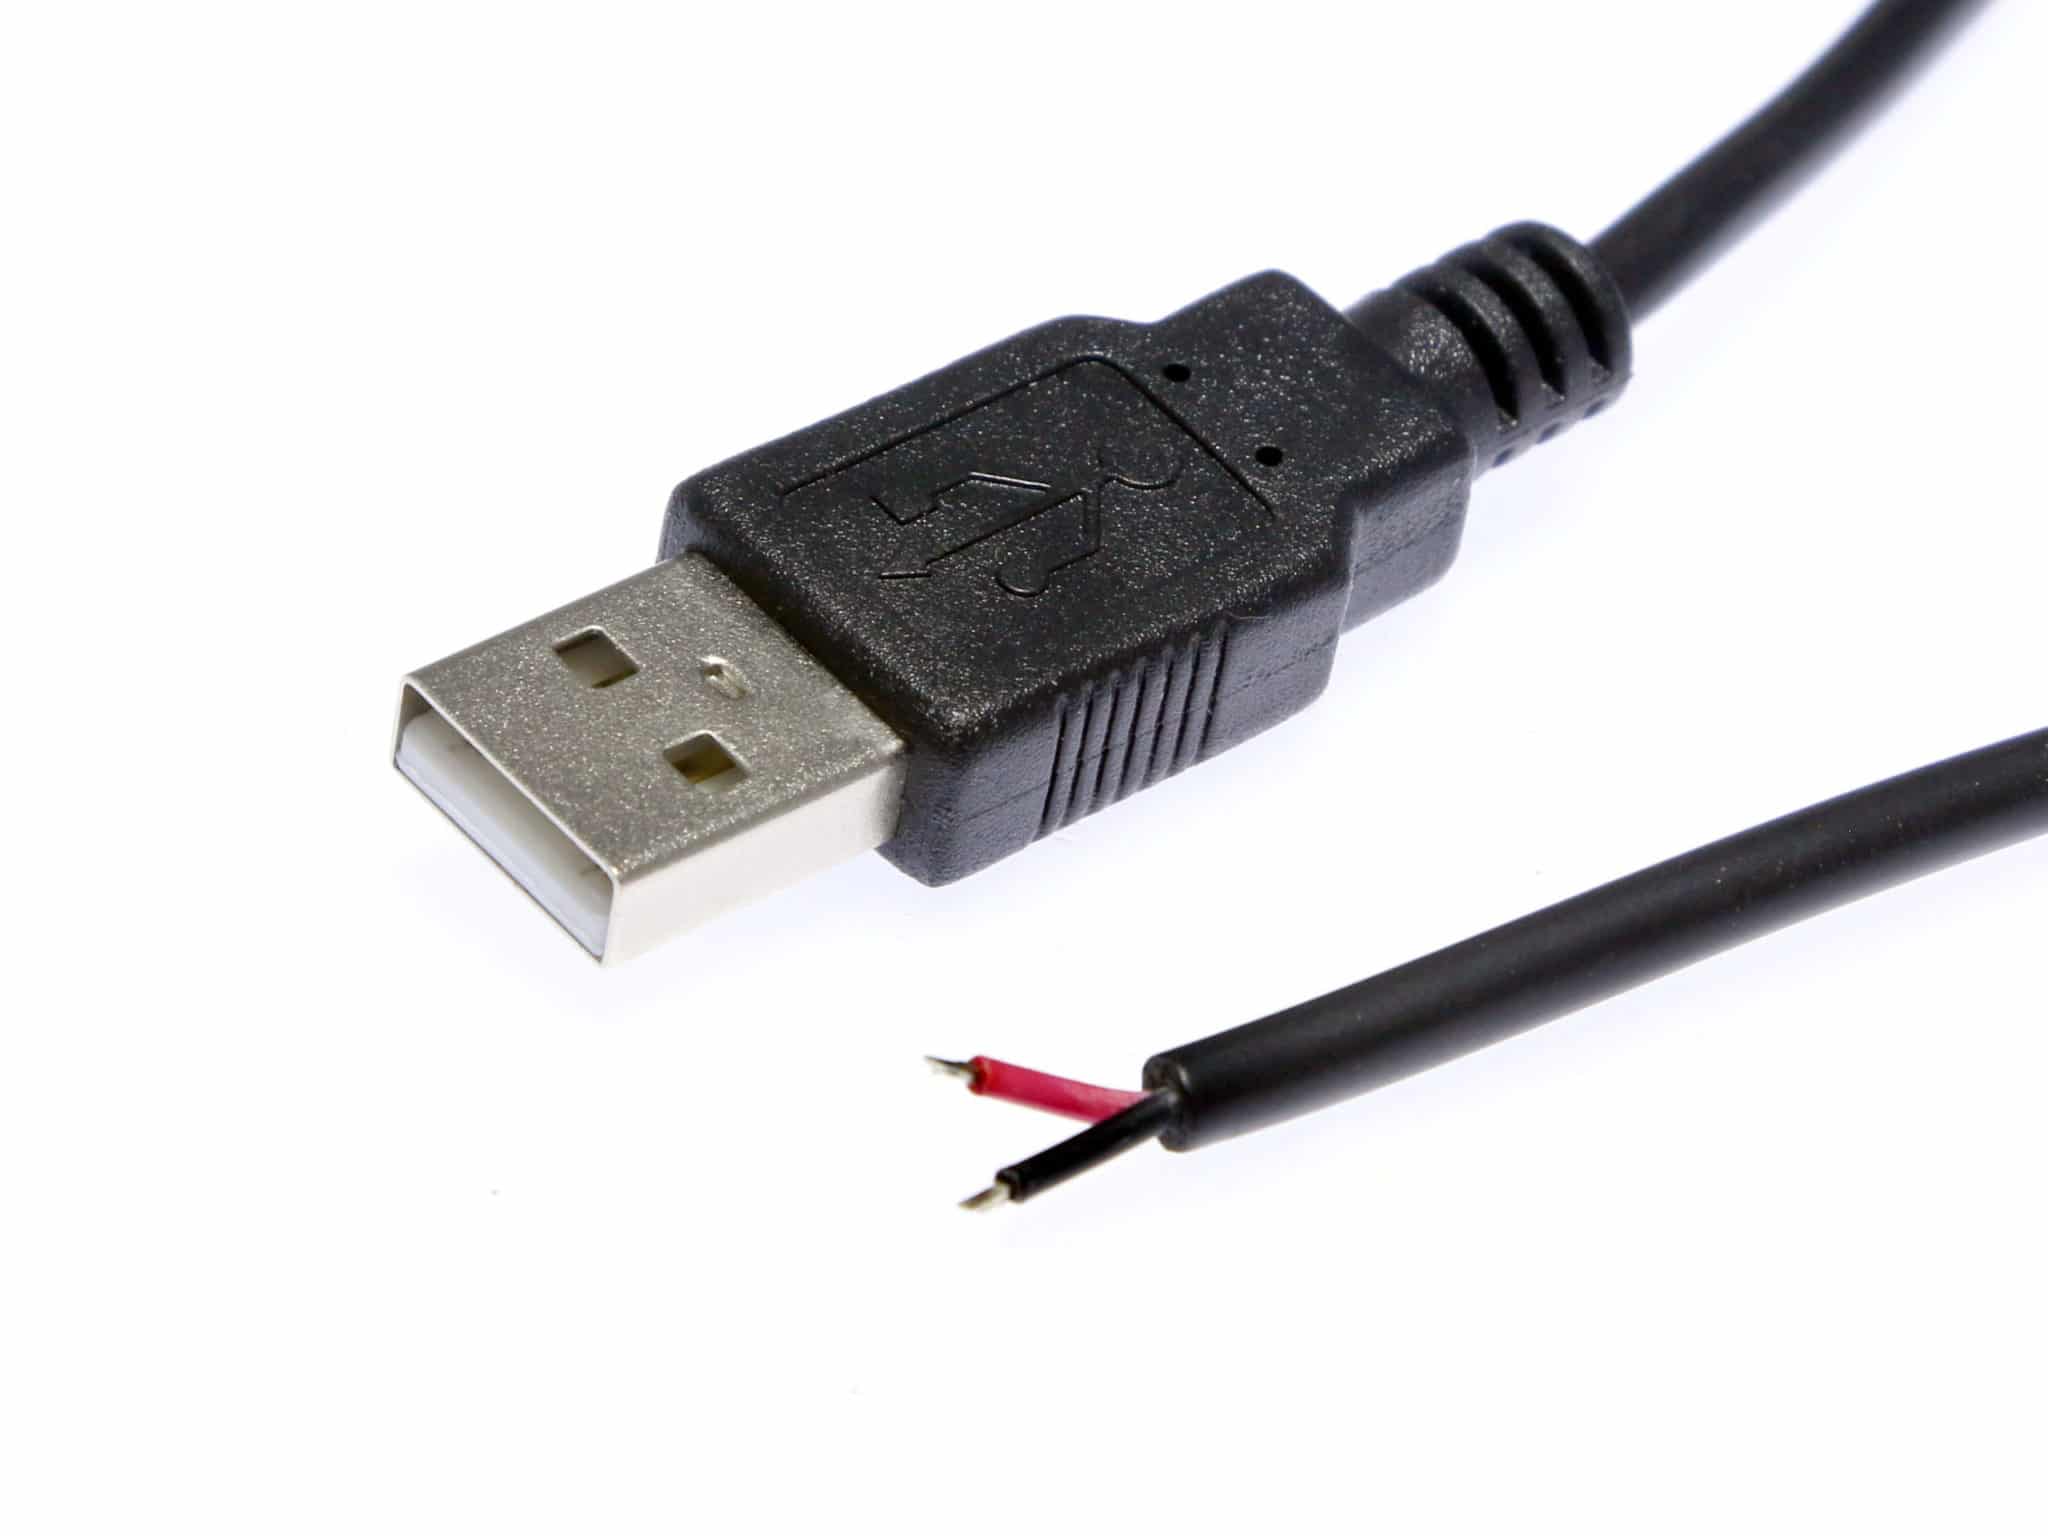 usb to usb power cable